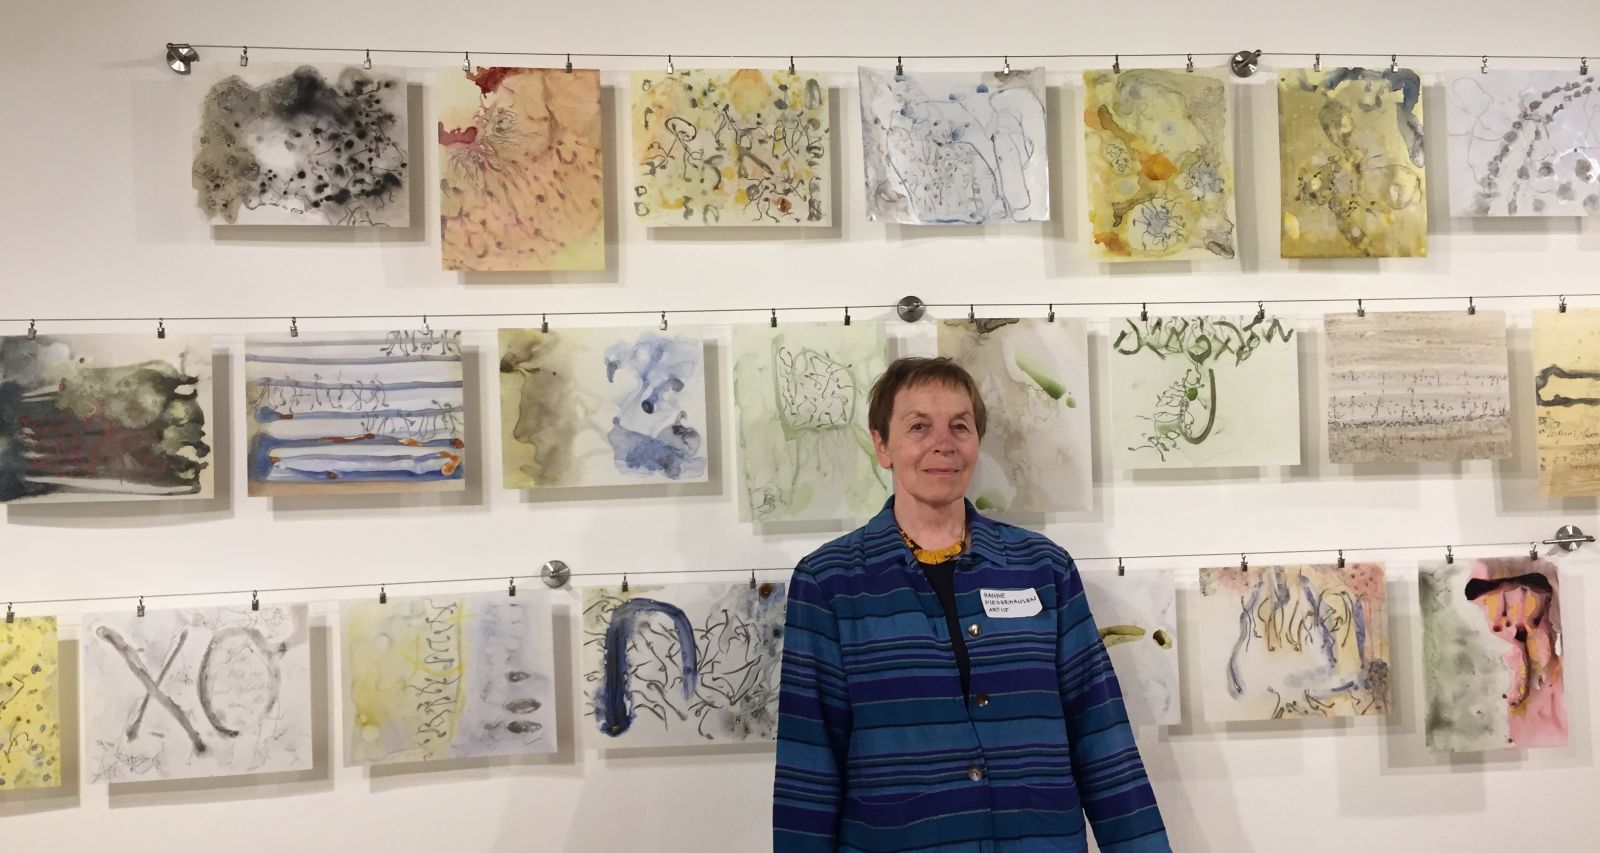 Image of artist in front of a wall of yupo artworks hung on three lines.